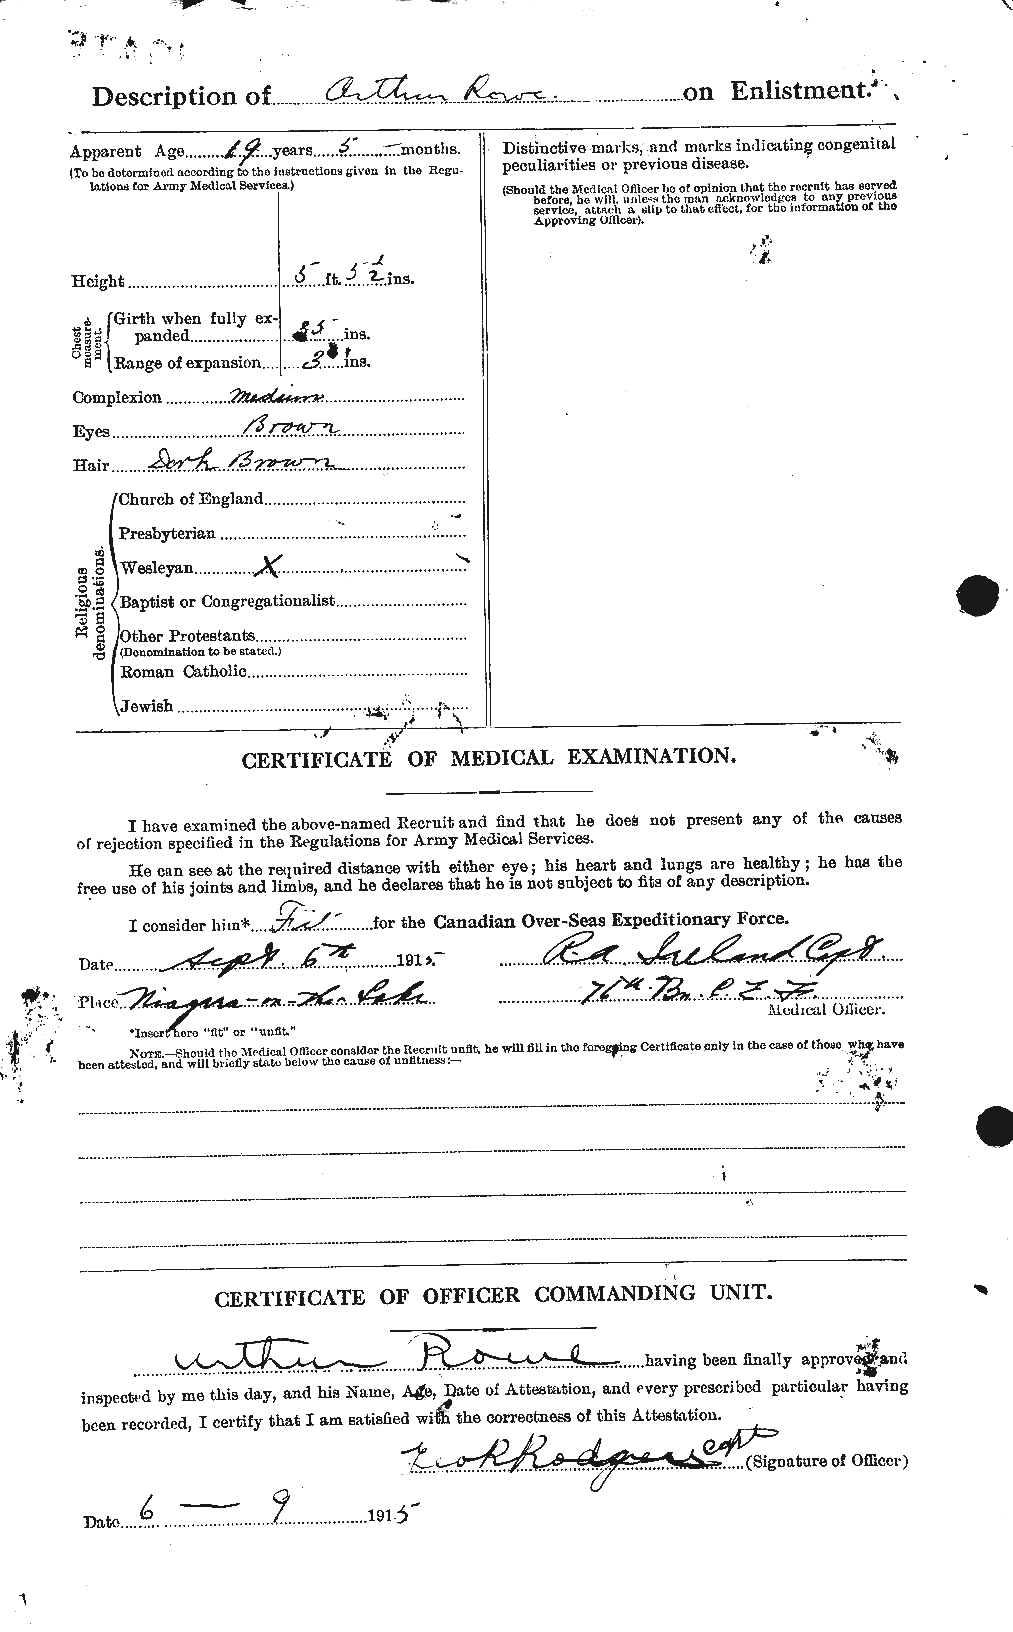 Personnel Records of the First World War - CEF 615791b